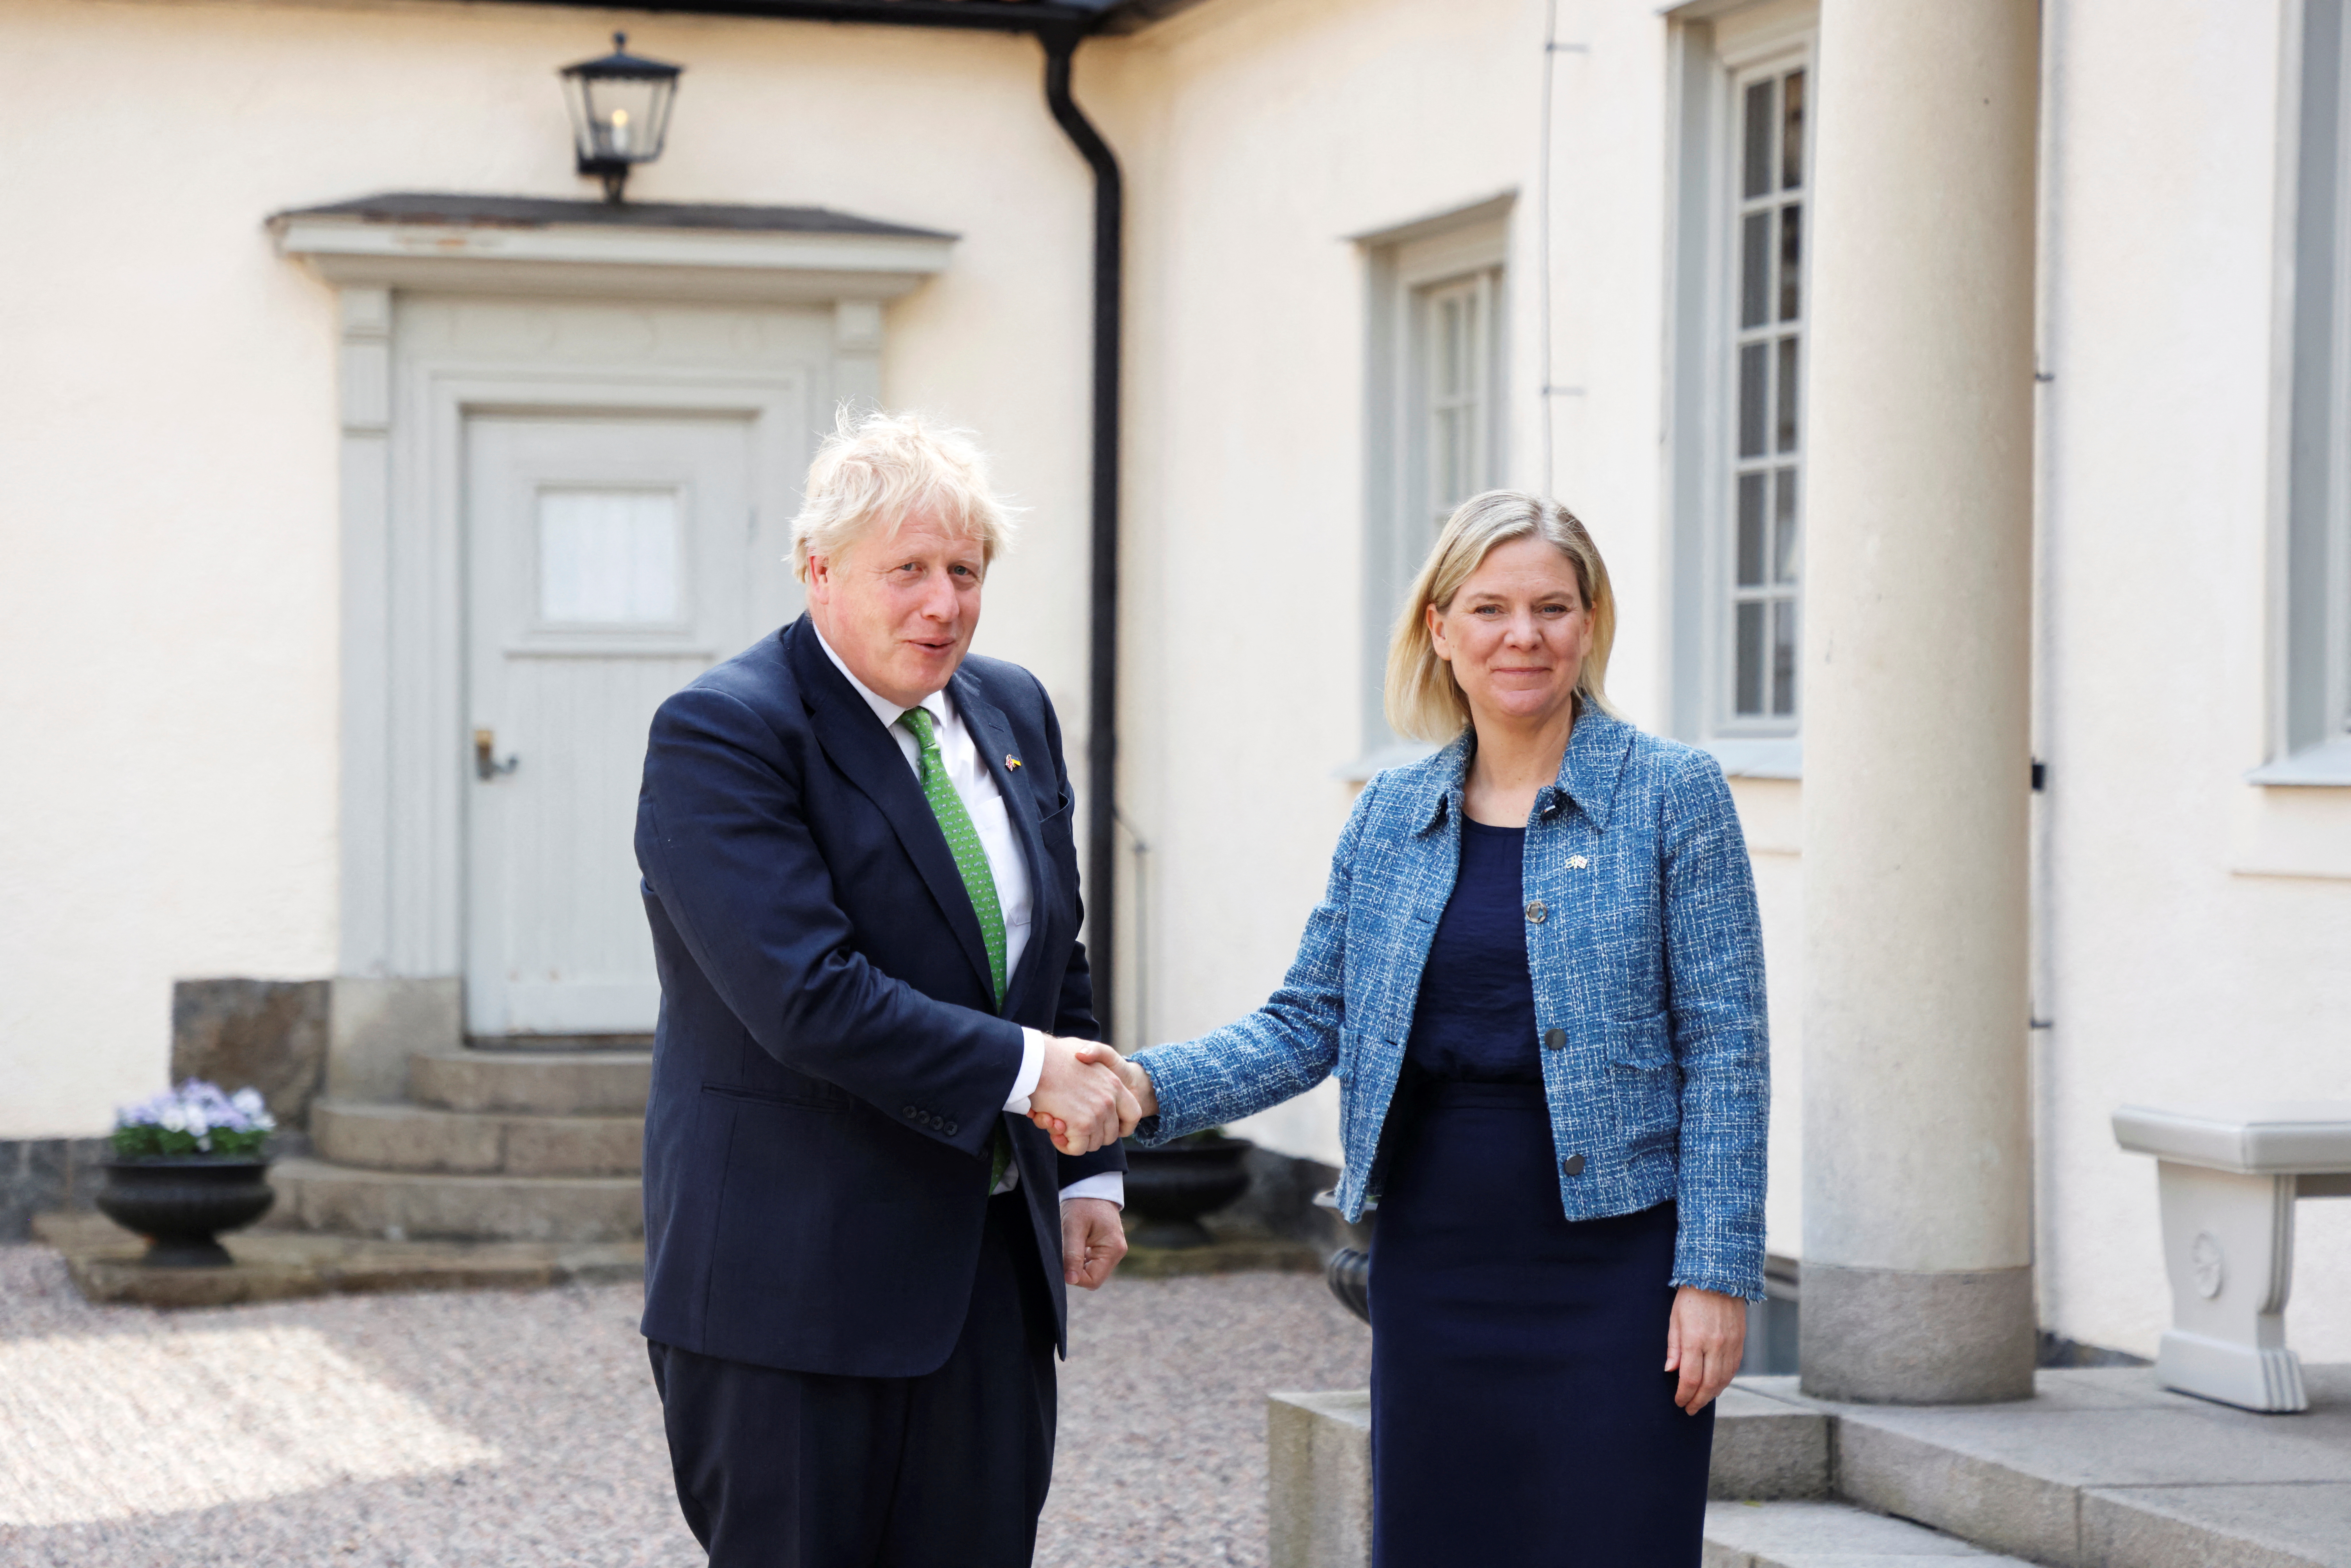 British Prime Minister Boris Johnson and Sweden's Prime Minister Magdalena Andersson meet in Harpsund